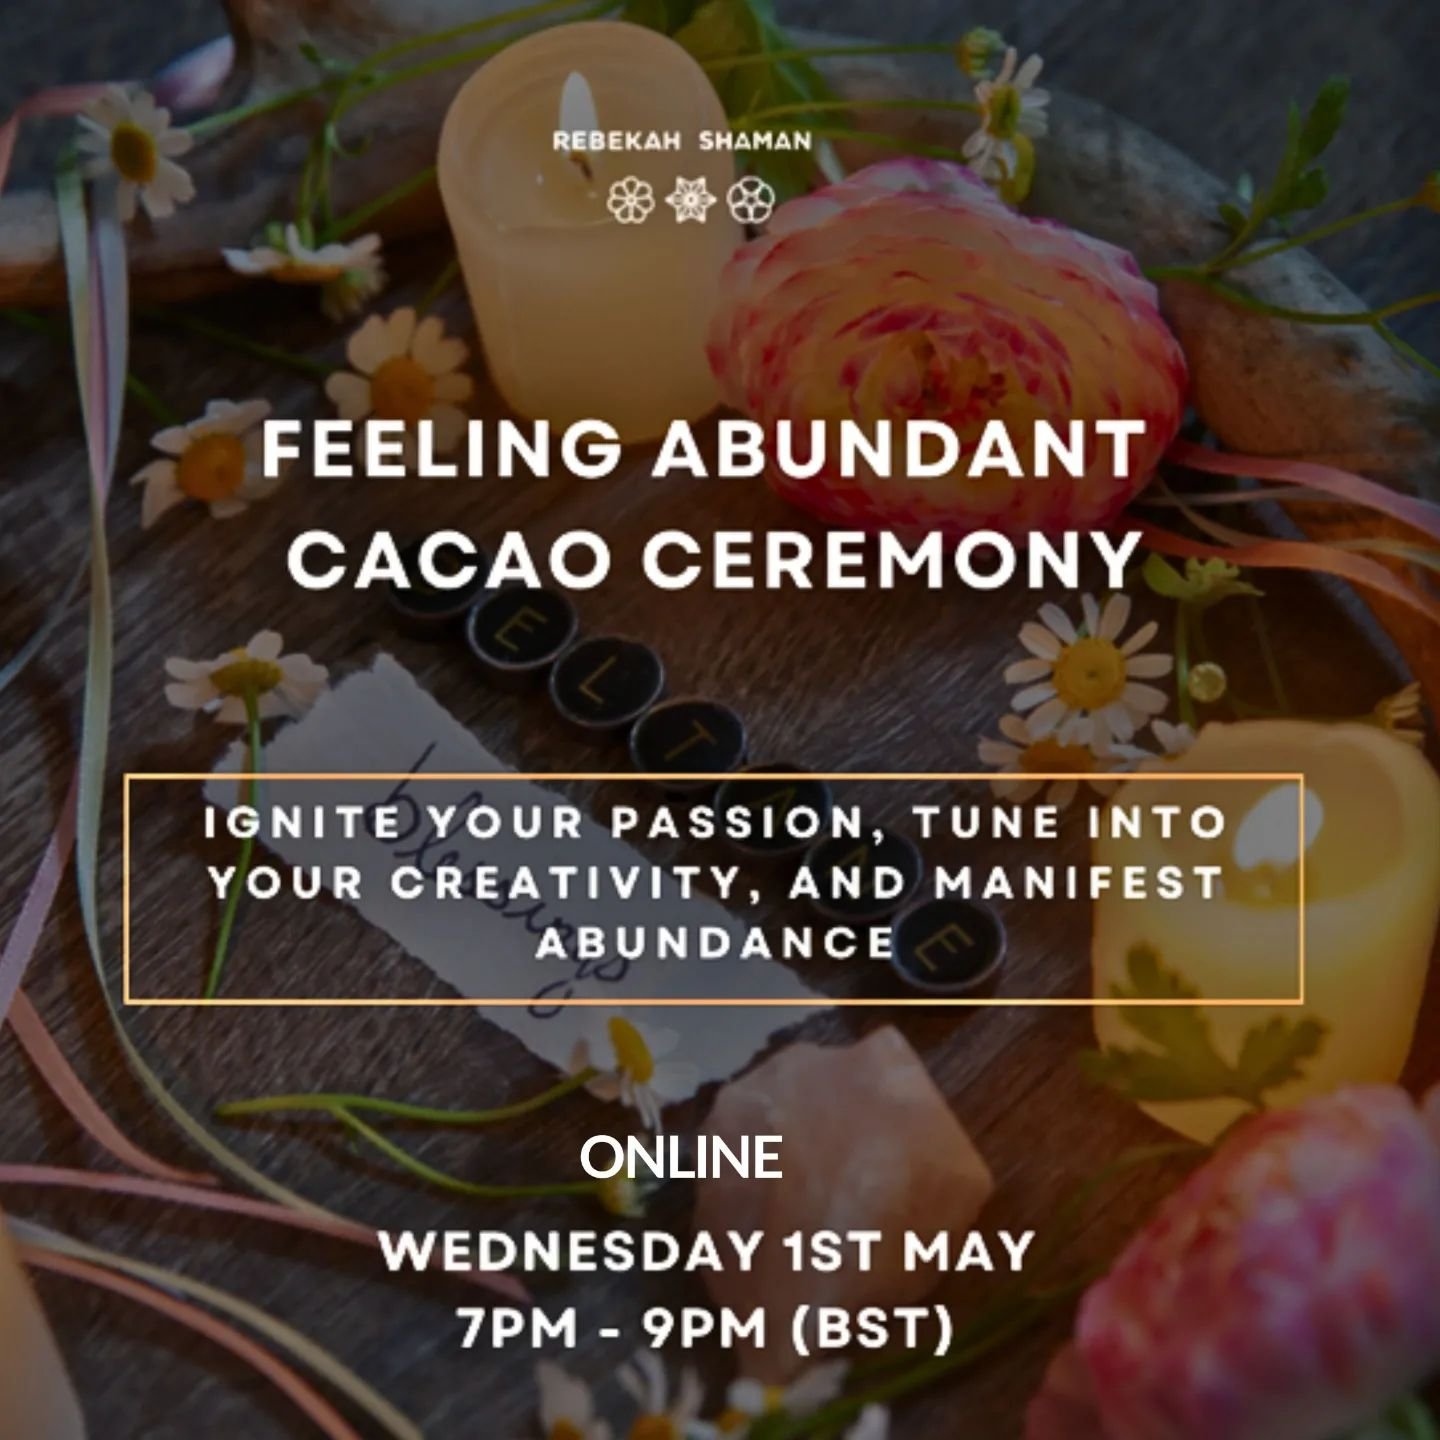 ☕ Join us today May 1st for our online Feeling Abundant Cacao Ceremony with our founder @rebekah_shaman This Cacao Ceremony is perfect for anyone who is seeking to unlock their full potential and step into a state of abundance.

✨Ceremony details:

T